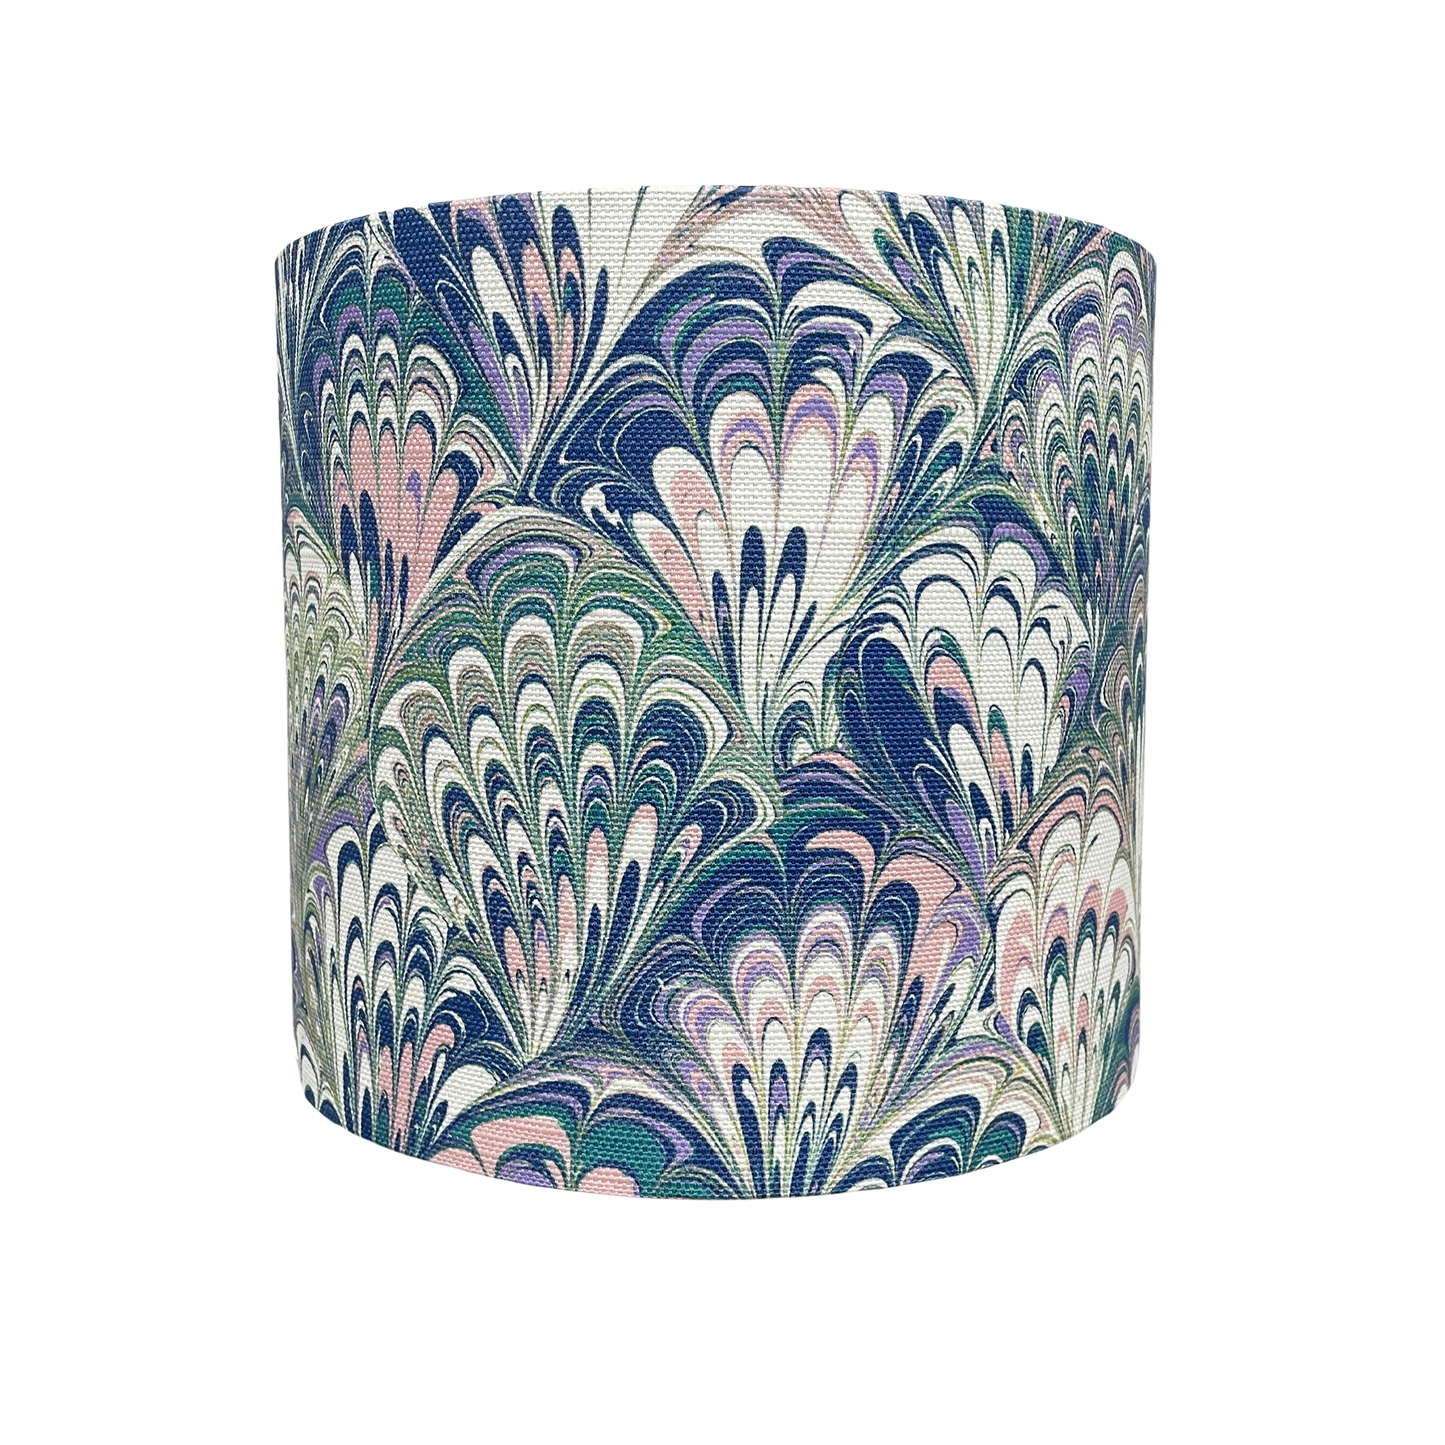 House of Amitié, 'Linen Lampshade Serpentine Spring Standard'